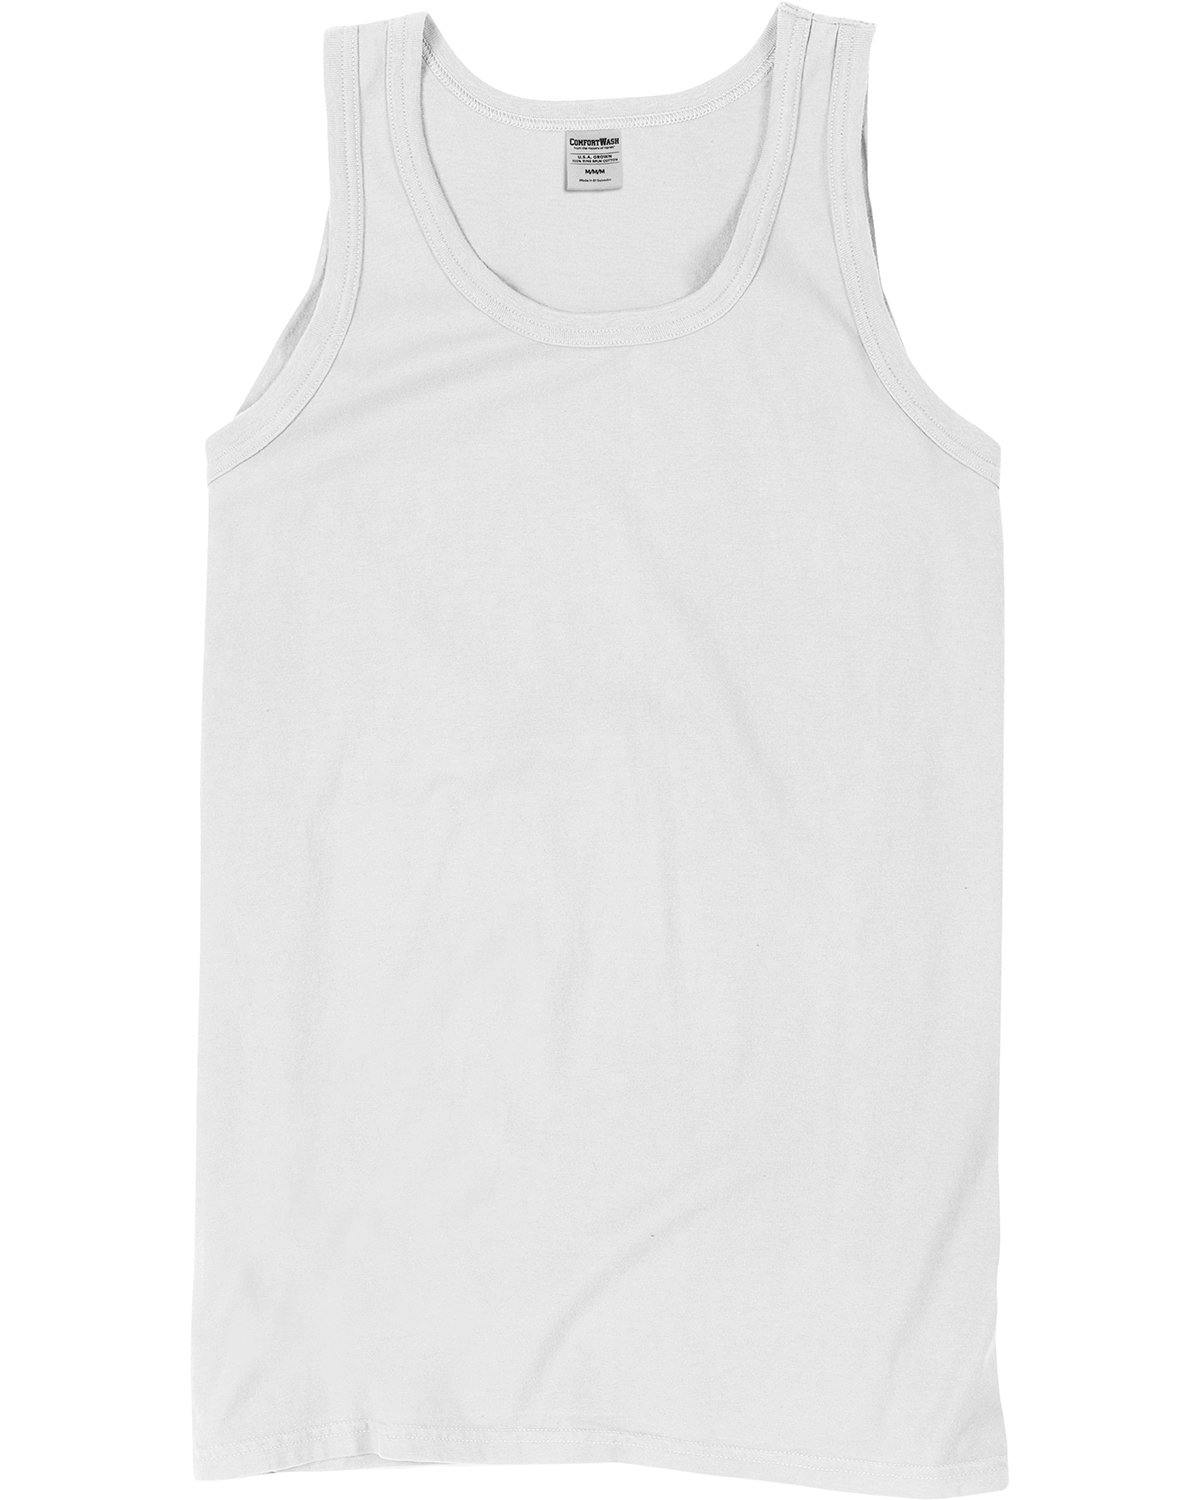 Image for Unisex Garment-Dyed Tank